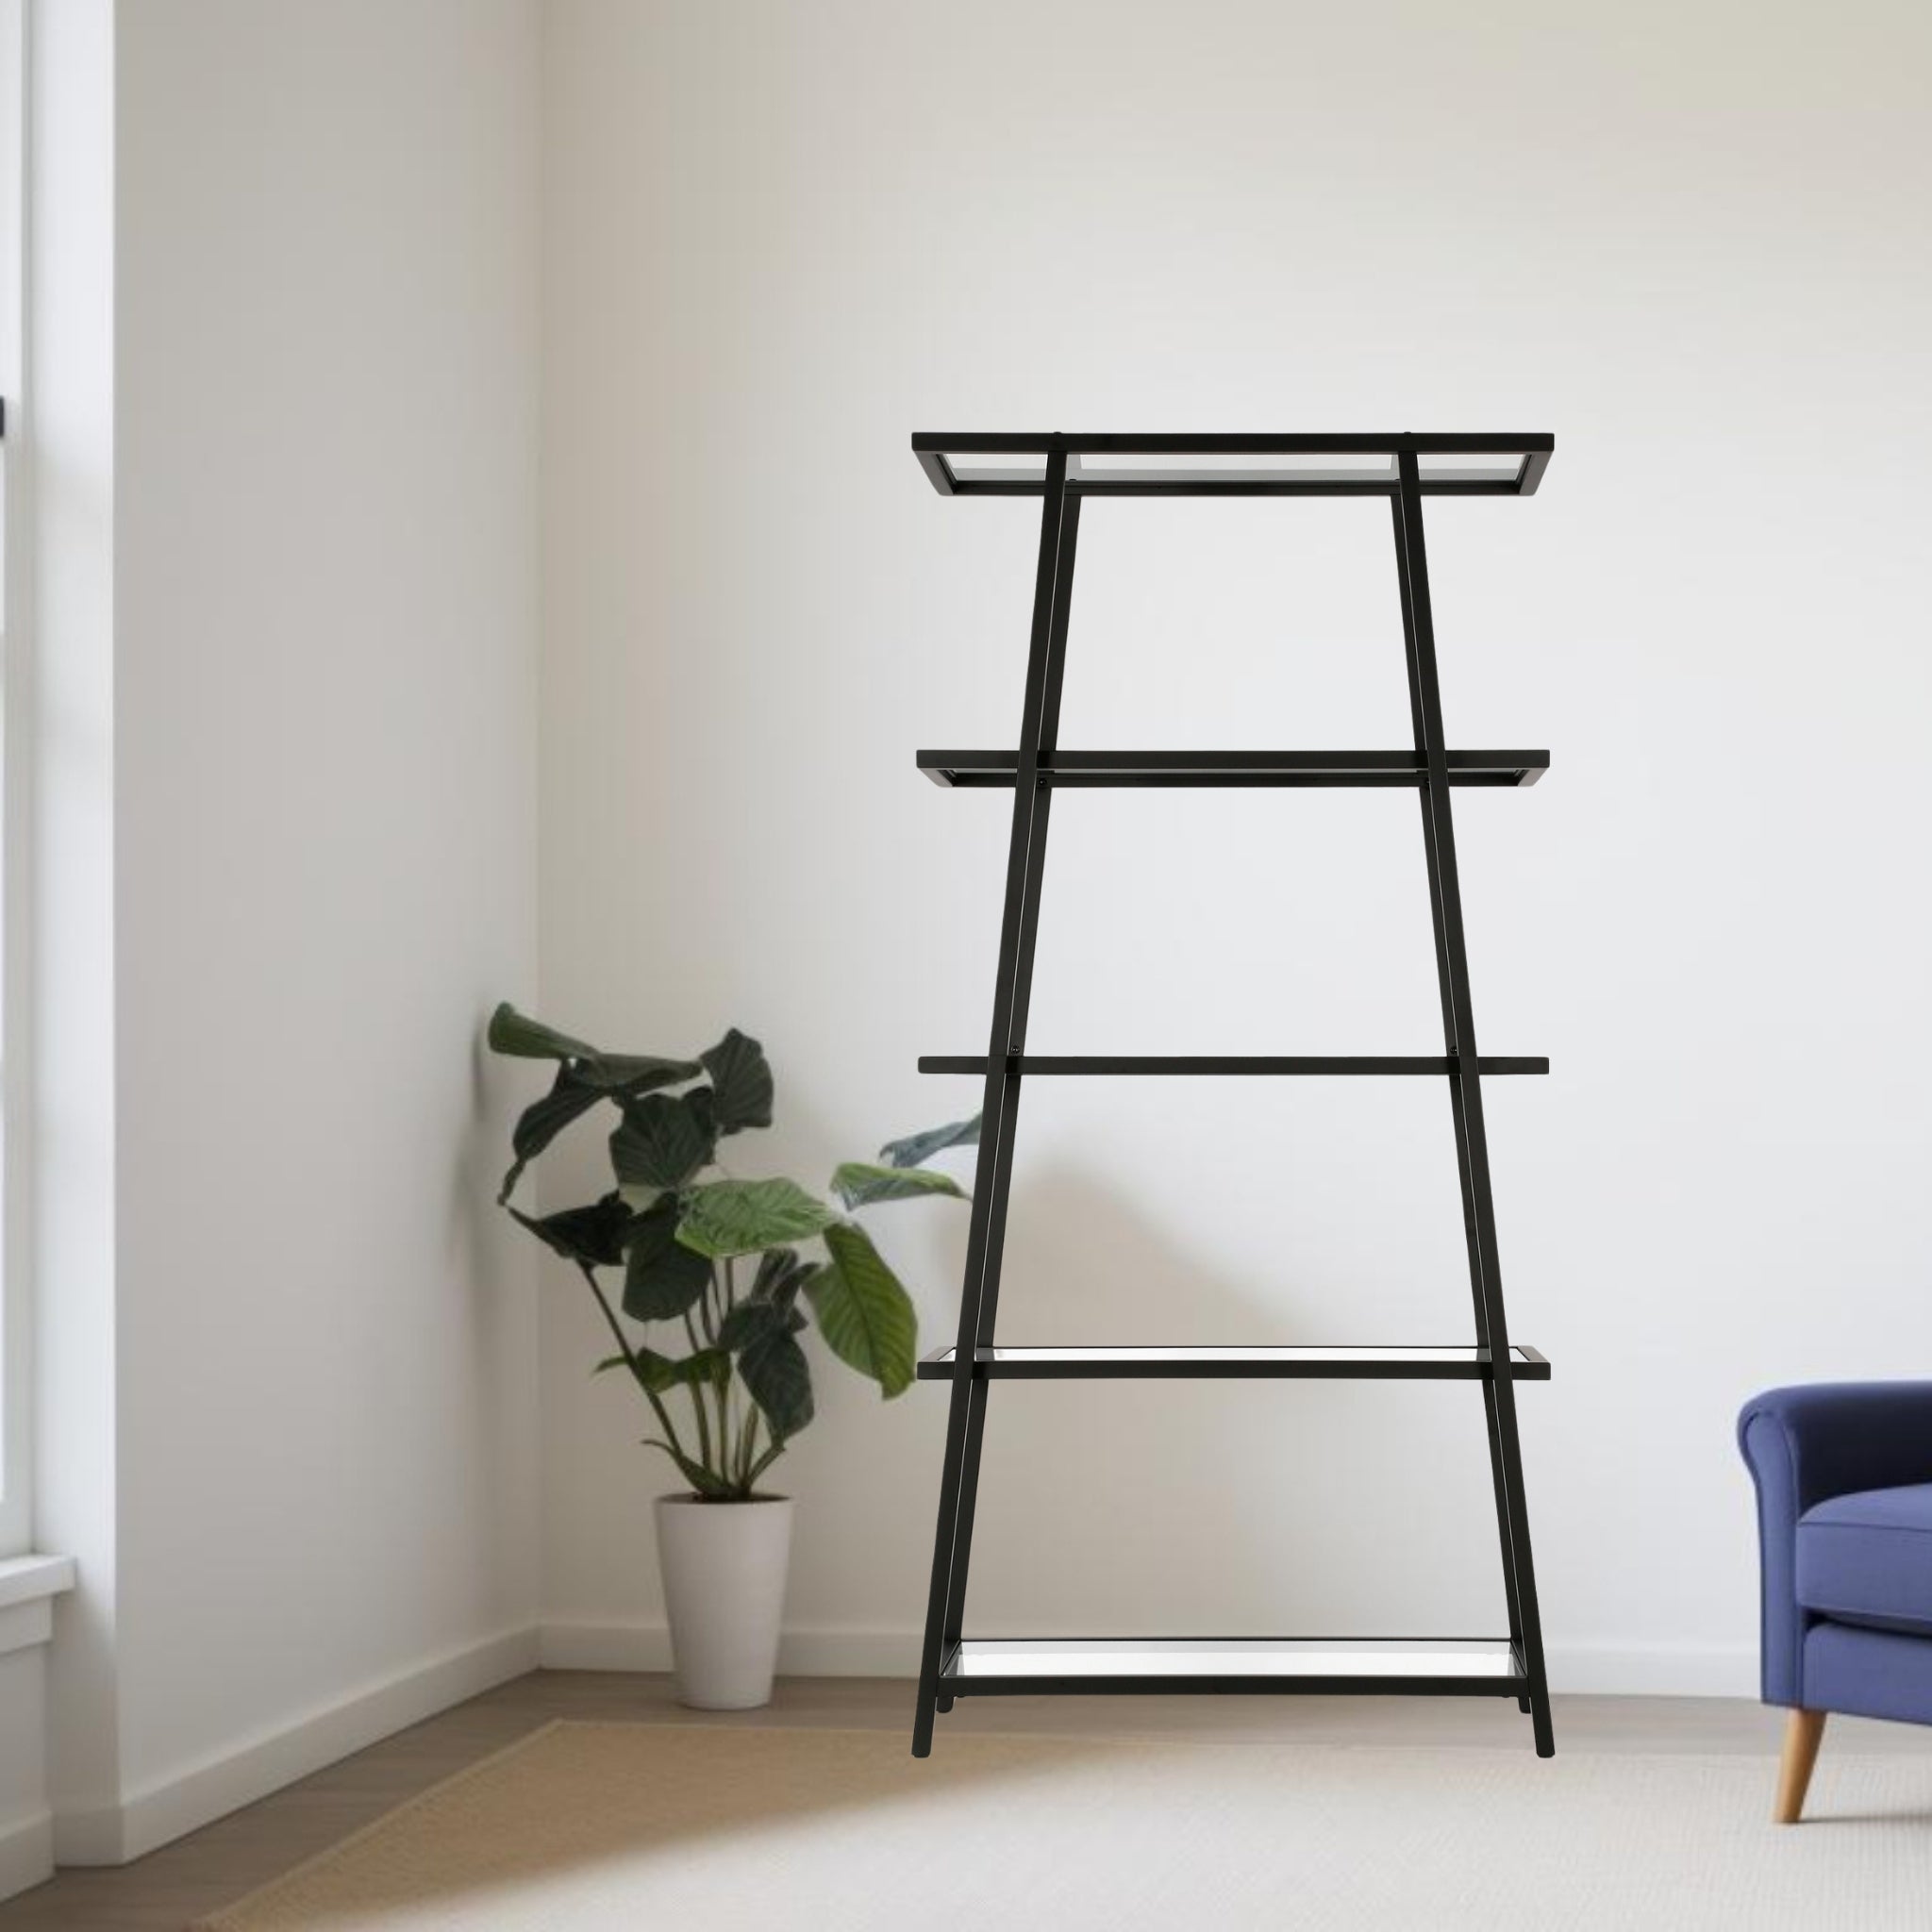 70" Black Metal and Glass Five Tier Etagere Bookcase